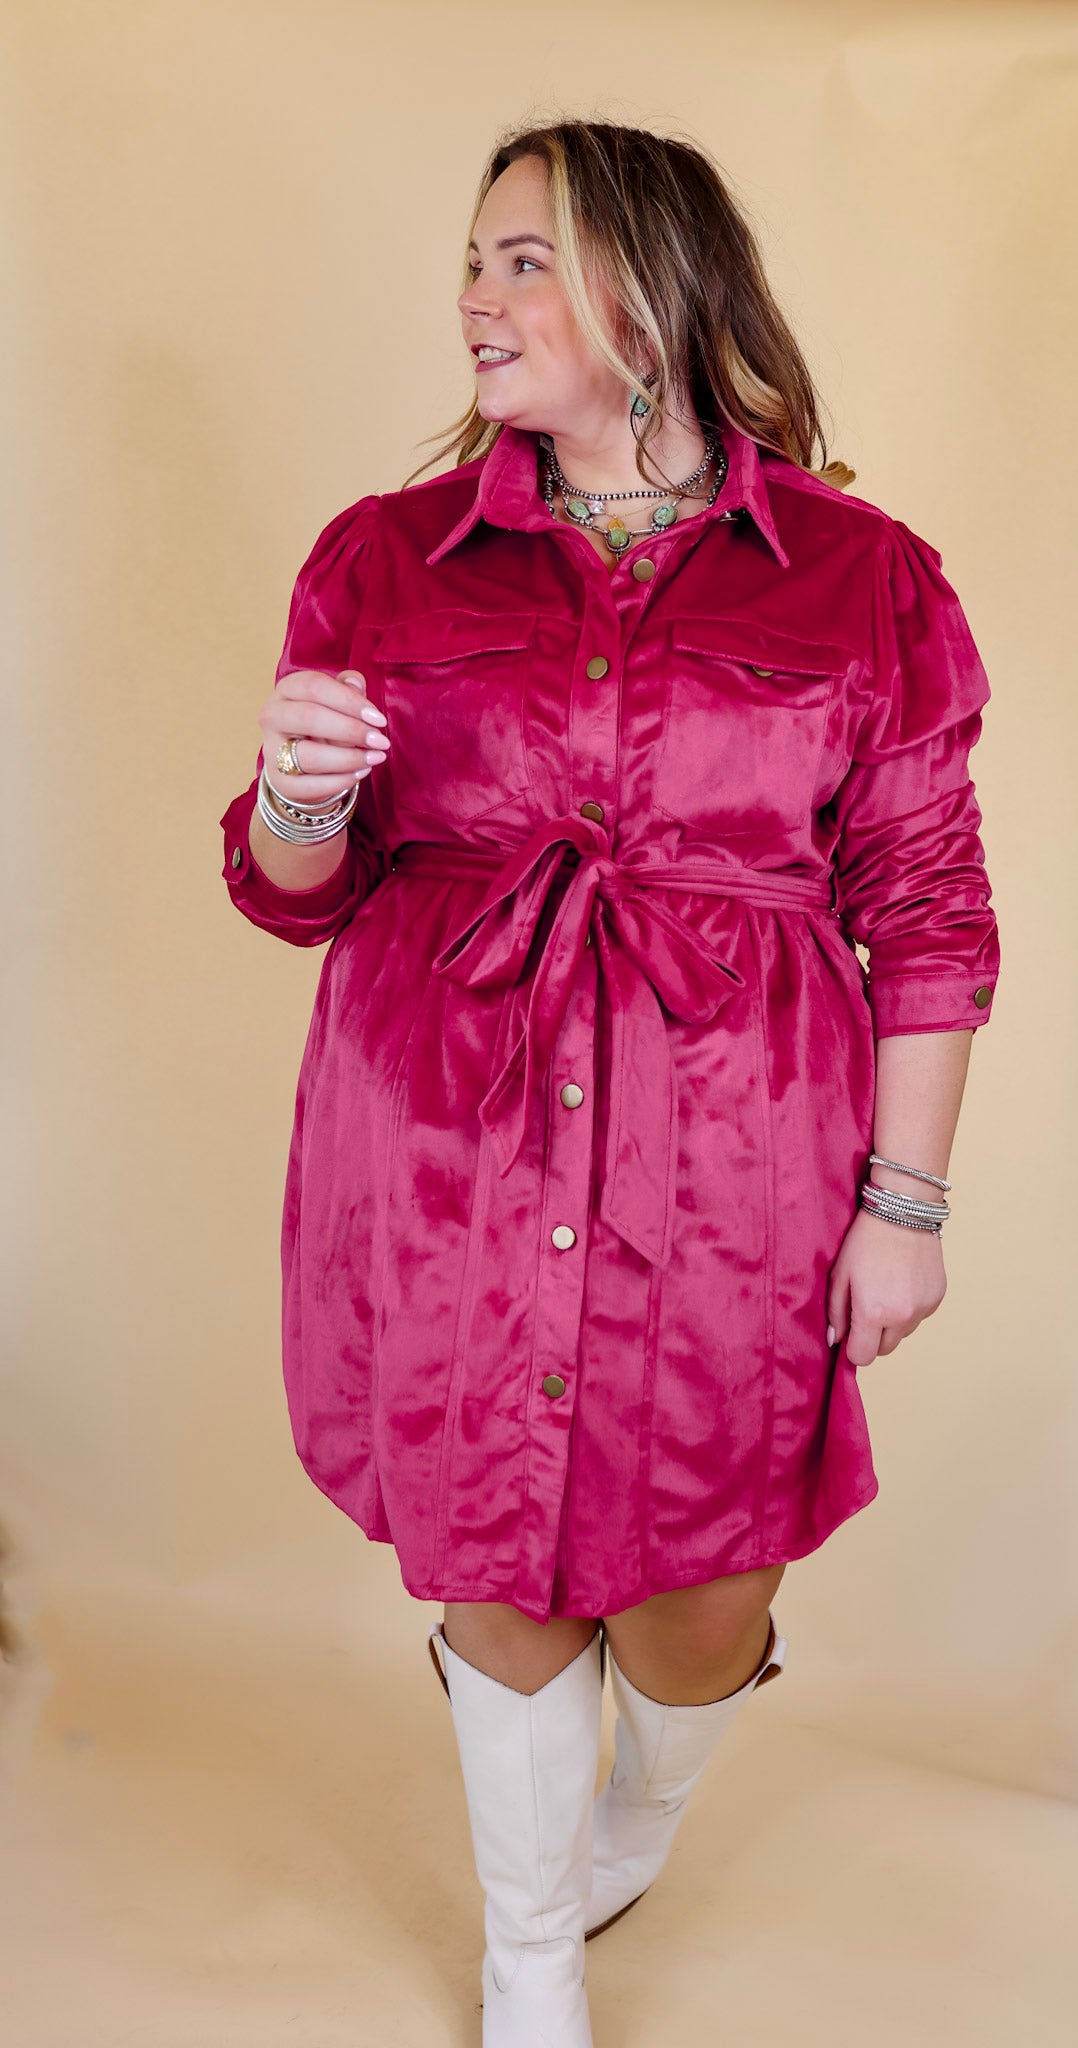 Free And Flirty Suede Button Up Dress with Waist Tie in Fuchsia Pink - Giddy Up Glamour Boutique